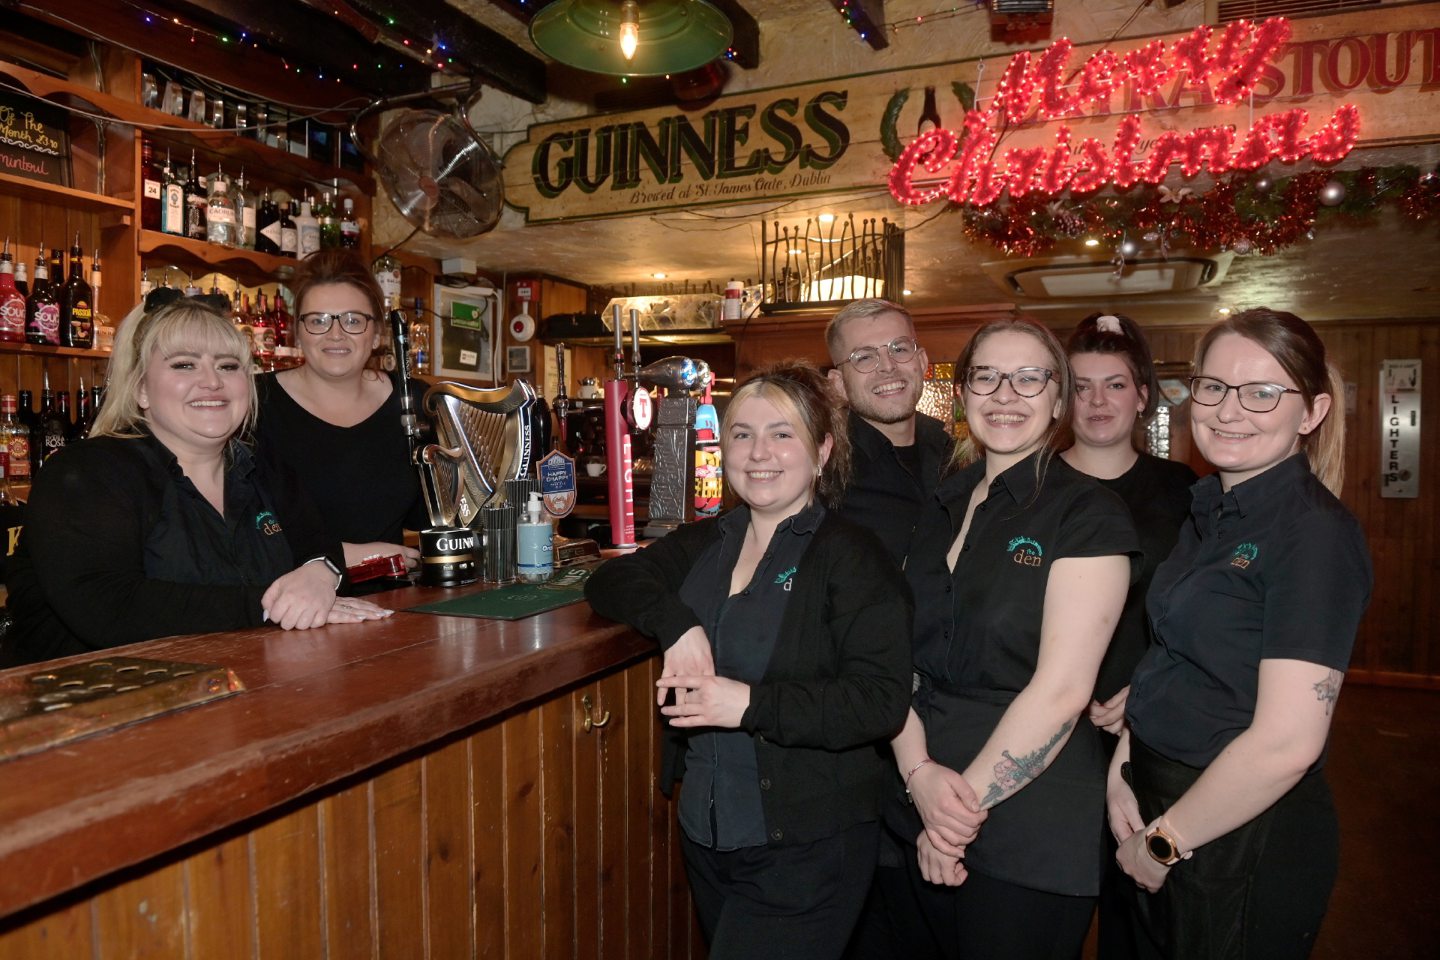 The bar staff from Johnny Foxes standing in front of and behind the bar, which has a large Guinness tap with a silver harp on it